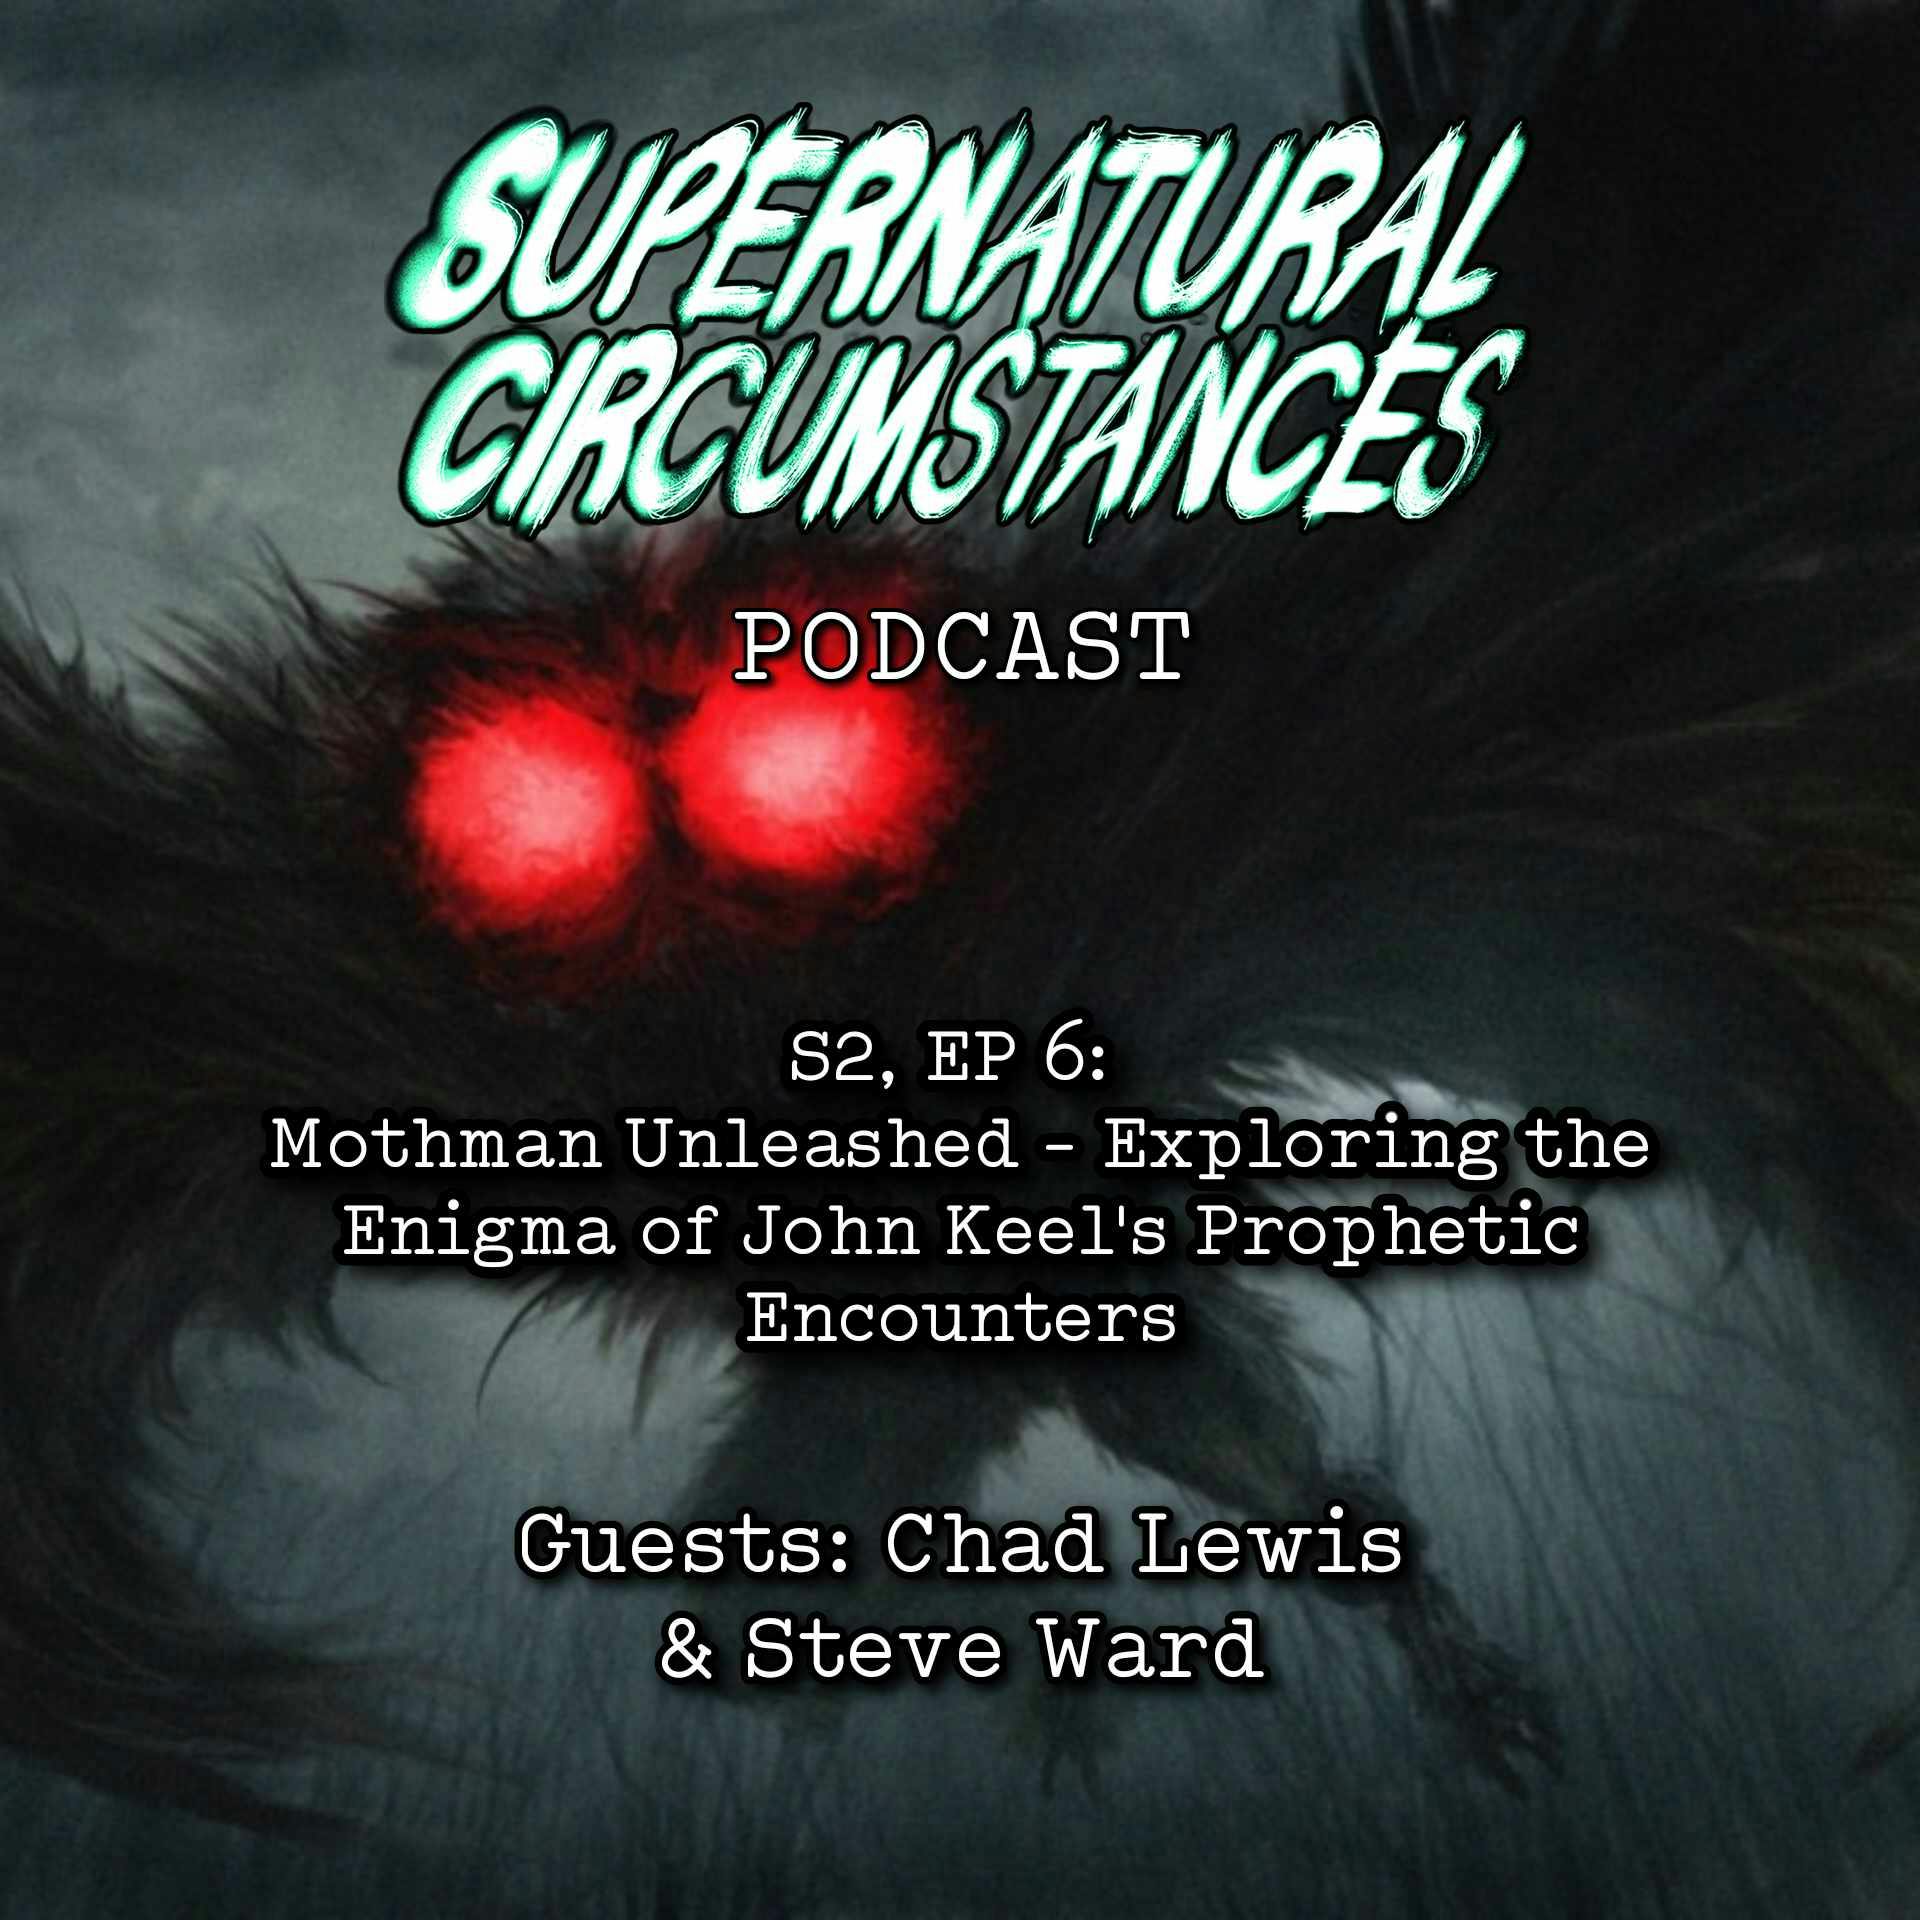 Mothman Unleashed - Exploring the Enigma of John Keel's Prophetic Encounters (with Steve Ward and Chad Lewis)